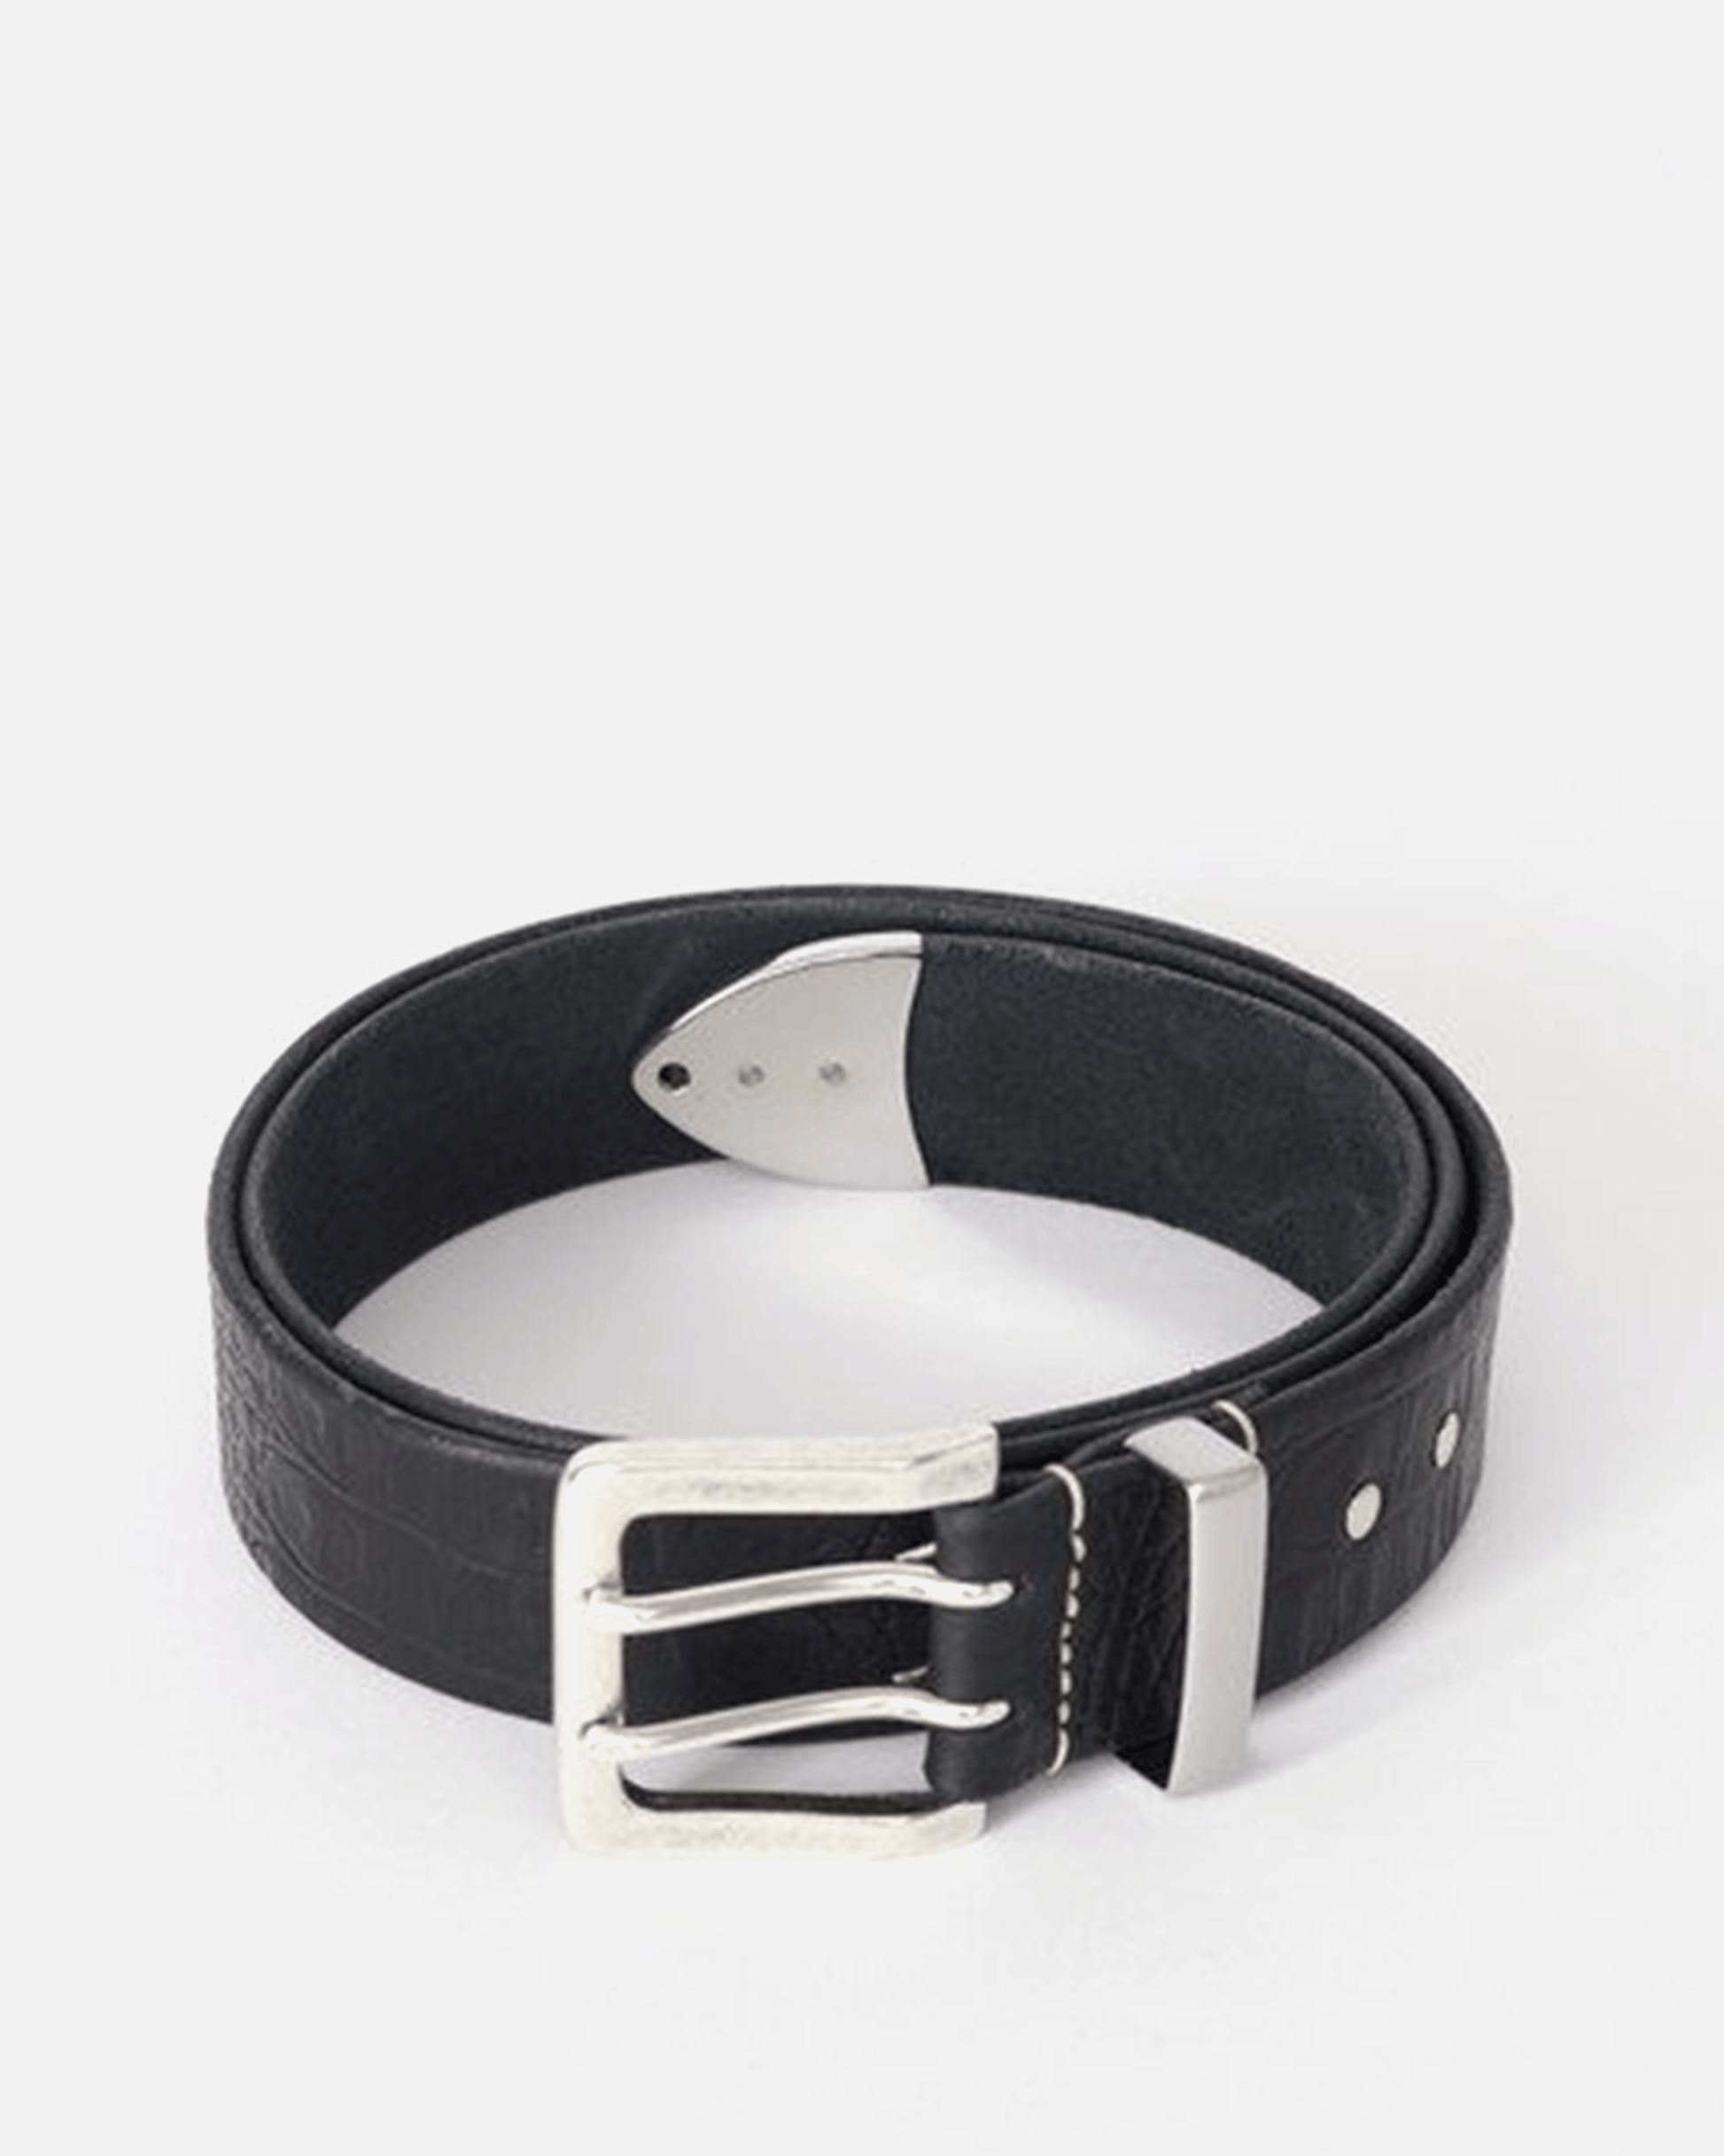 Our Legacy Leather Goods Double Tongue Belt in Black